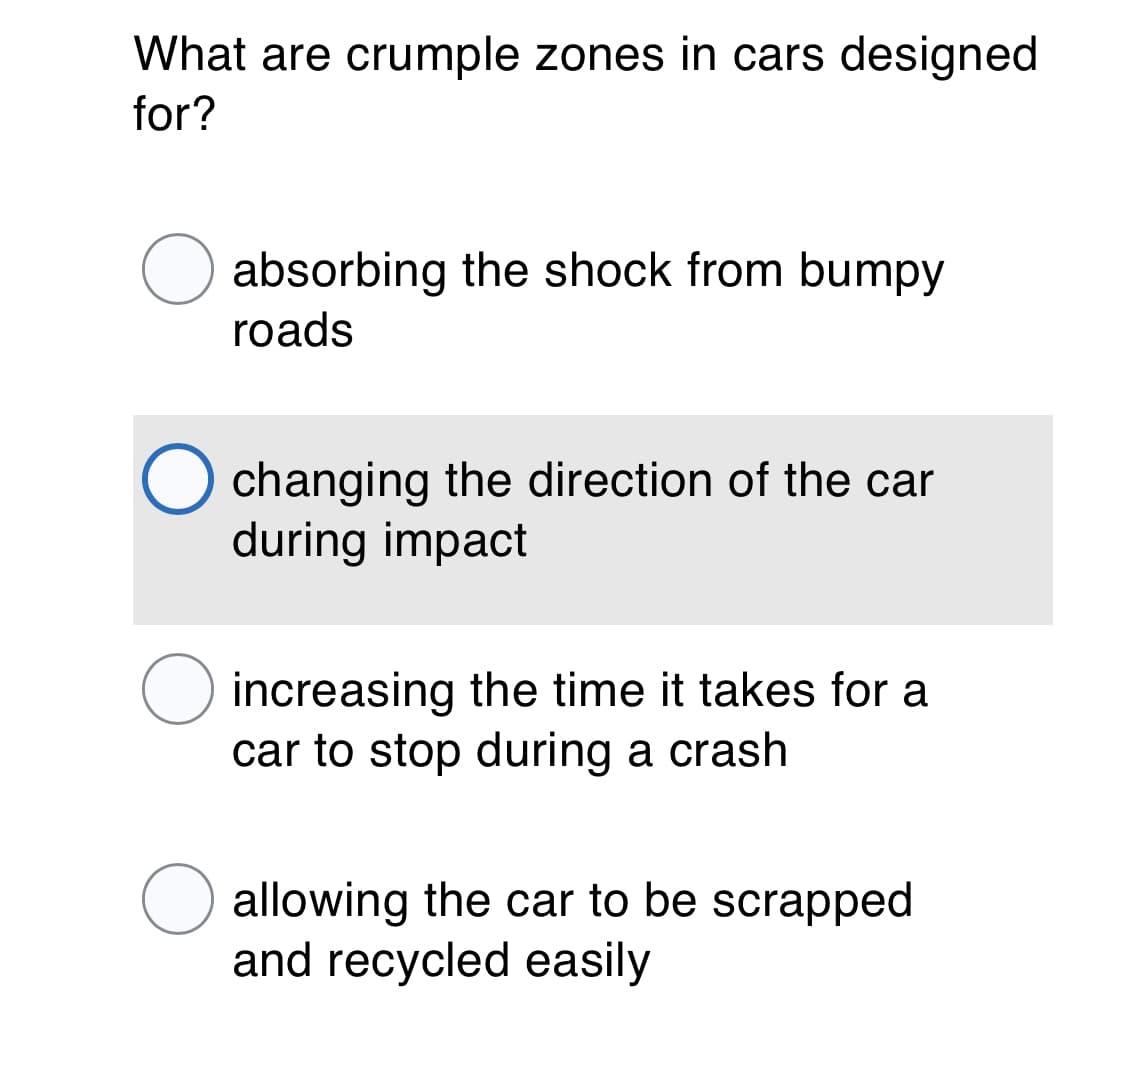 What are crumple zones in cars designed
for?
O absorbing the shock from bumpy
roads
changing the direction of the car
during impact
increasing the time it takes for a
car to stop during a crash
allowing the car to be scrapped
and recycled easily
